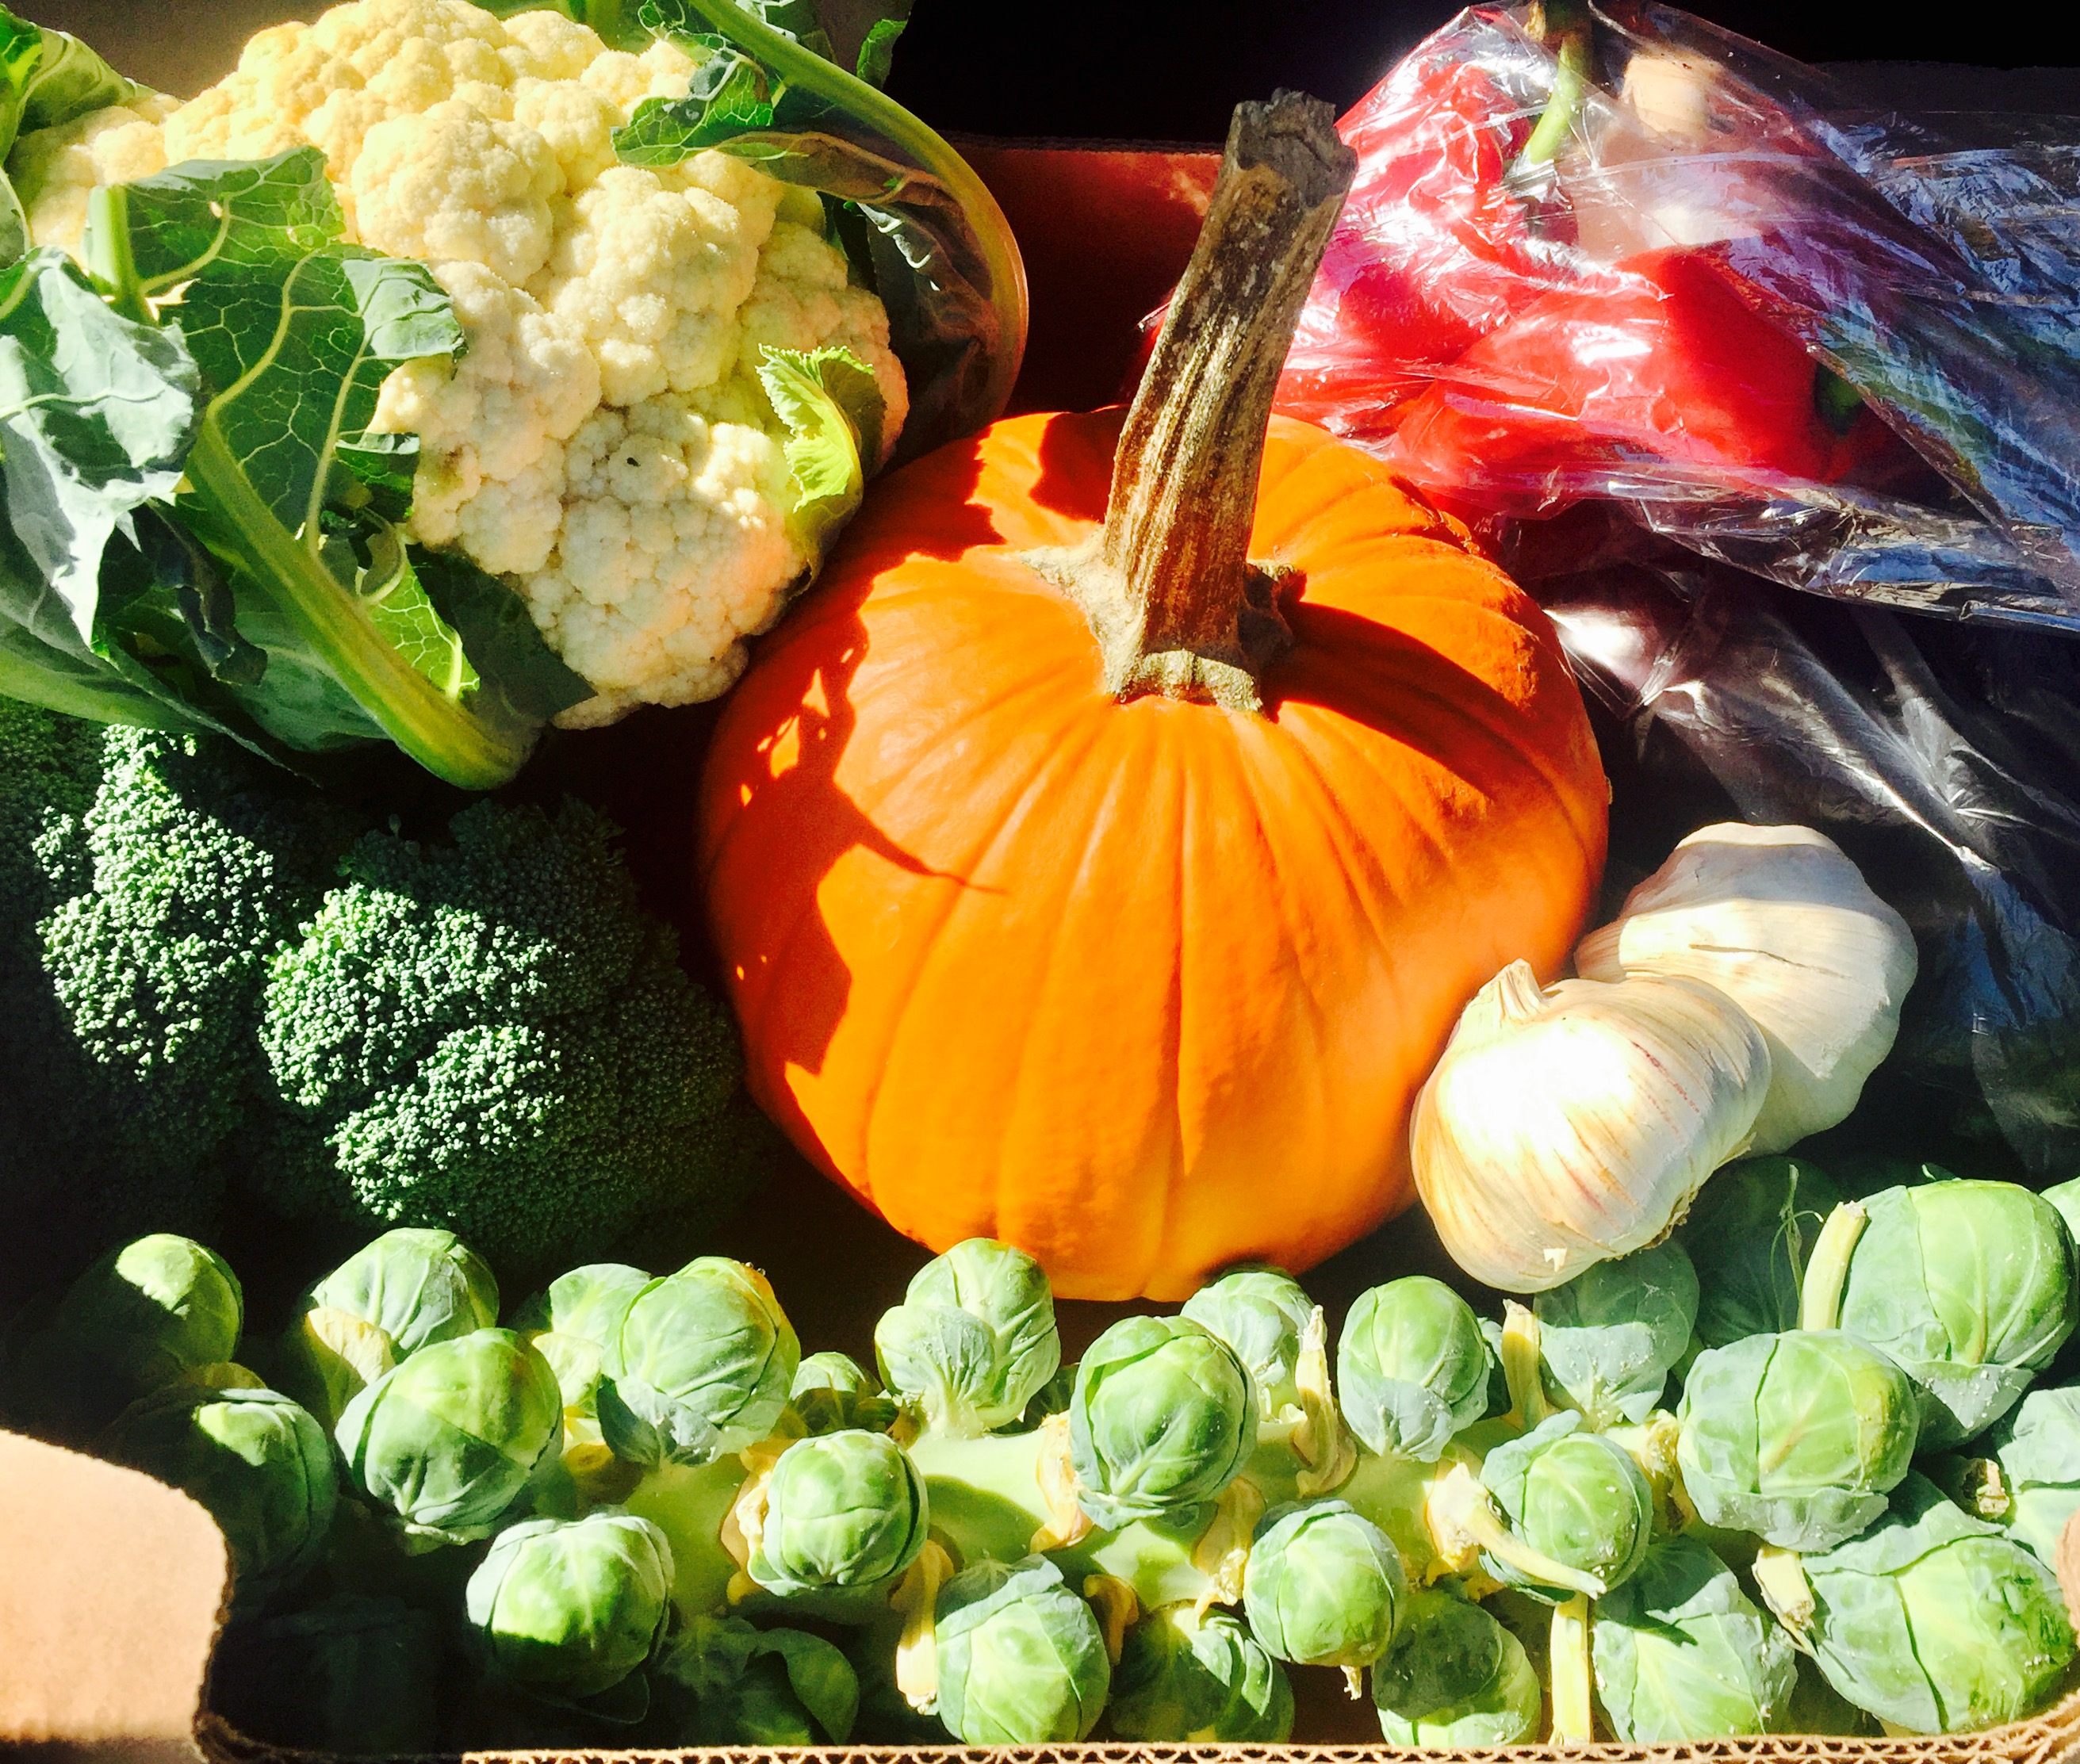 Fresh produce from our local farmer's market, testing dishes for our Thanksgiving menu